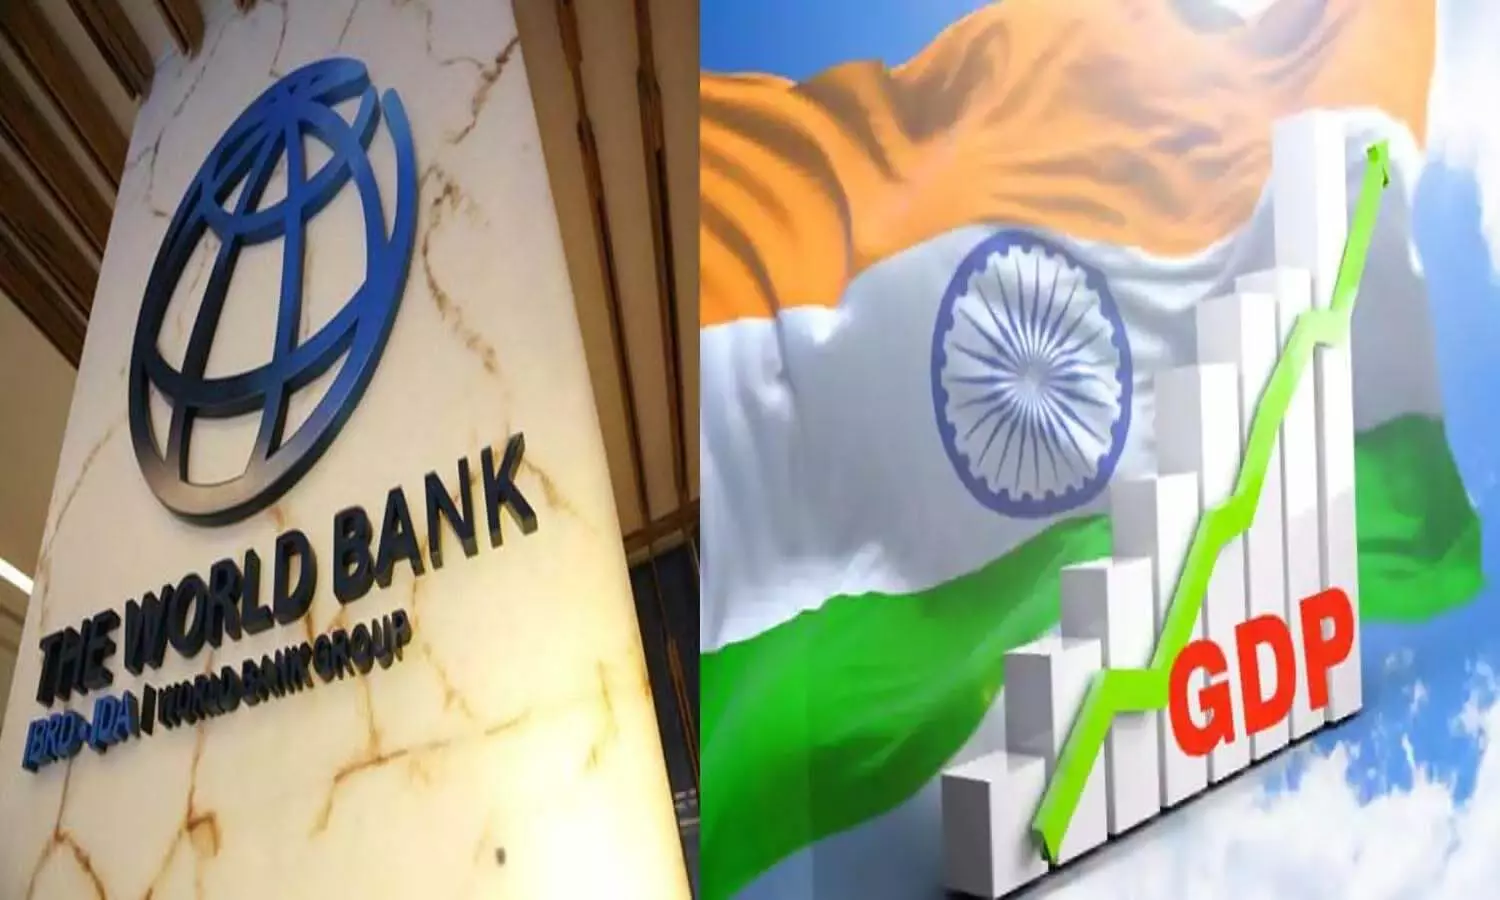 Indias Growth Rate: World Bank increases Indias GDP estimate, expected to grow by 6.9% in FY 23